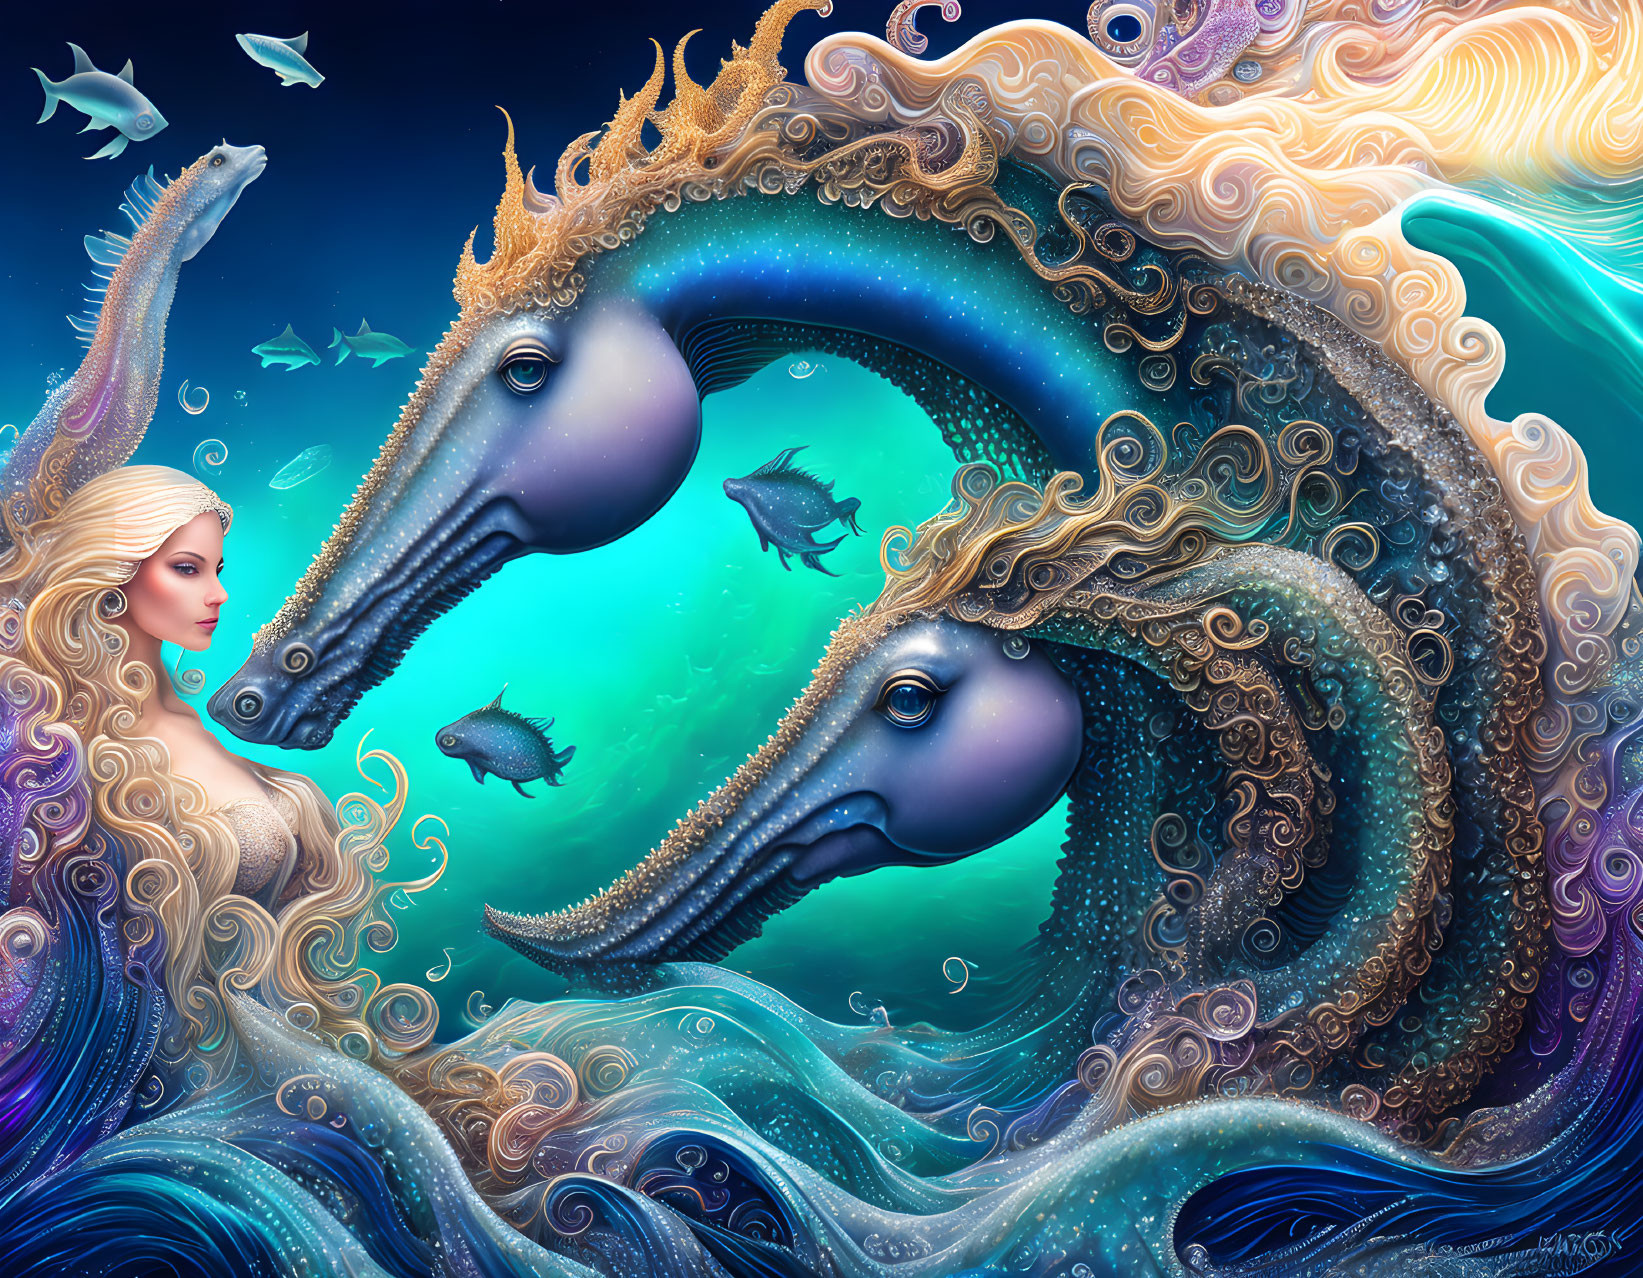 Fantasy illustration of woman with flowing hair and seahorses in underwater scene